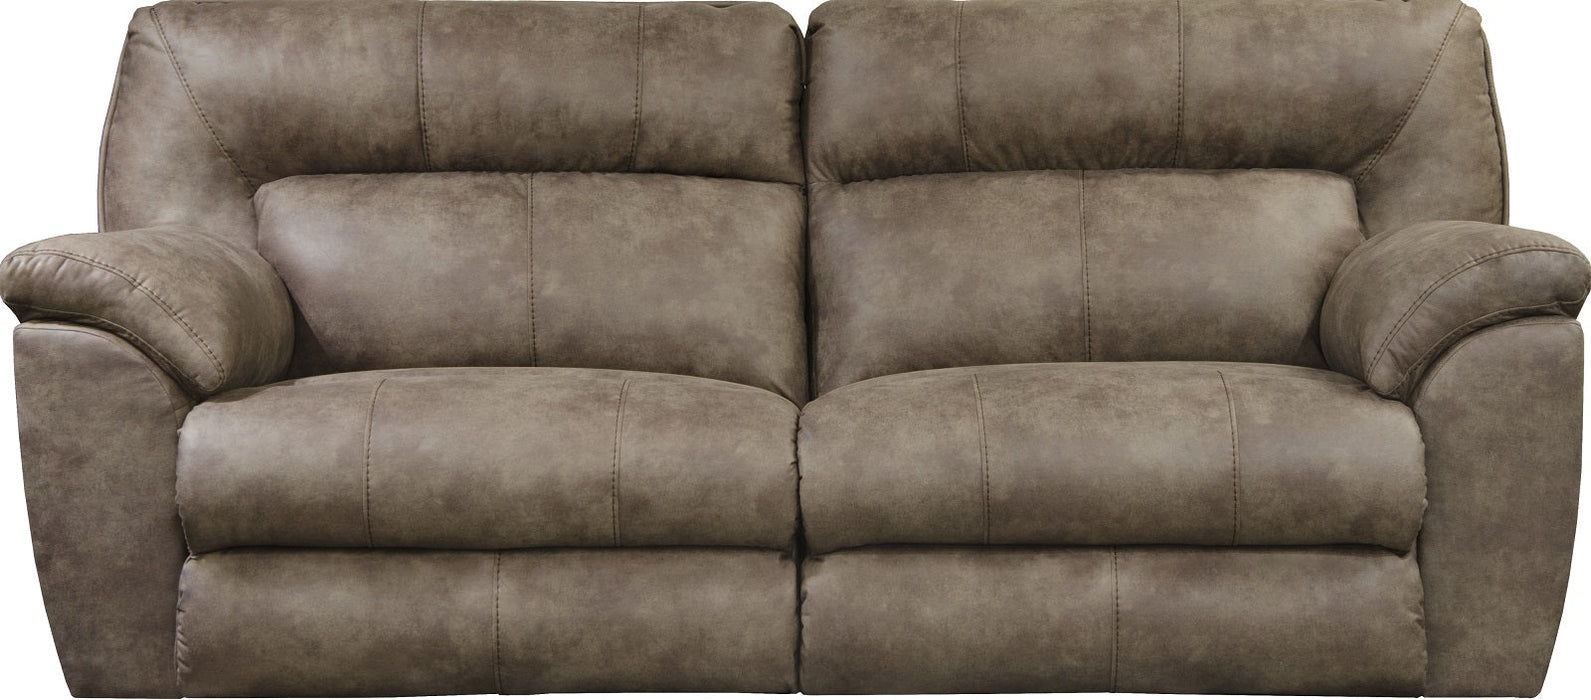 Catnapper Hollins 88"Power Reclining Sofa in Coffee